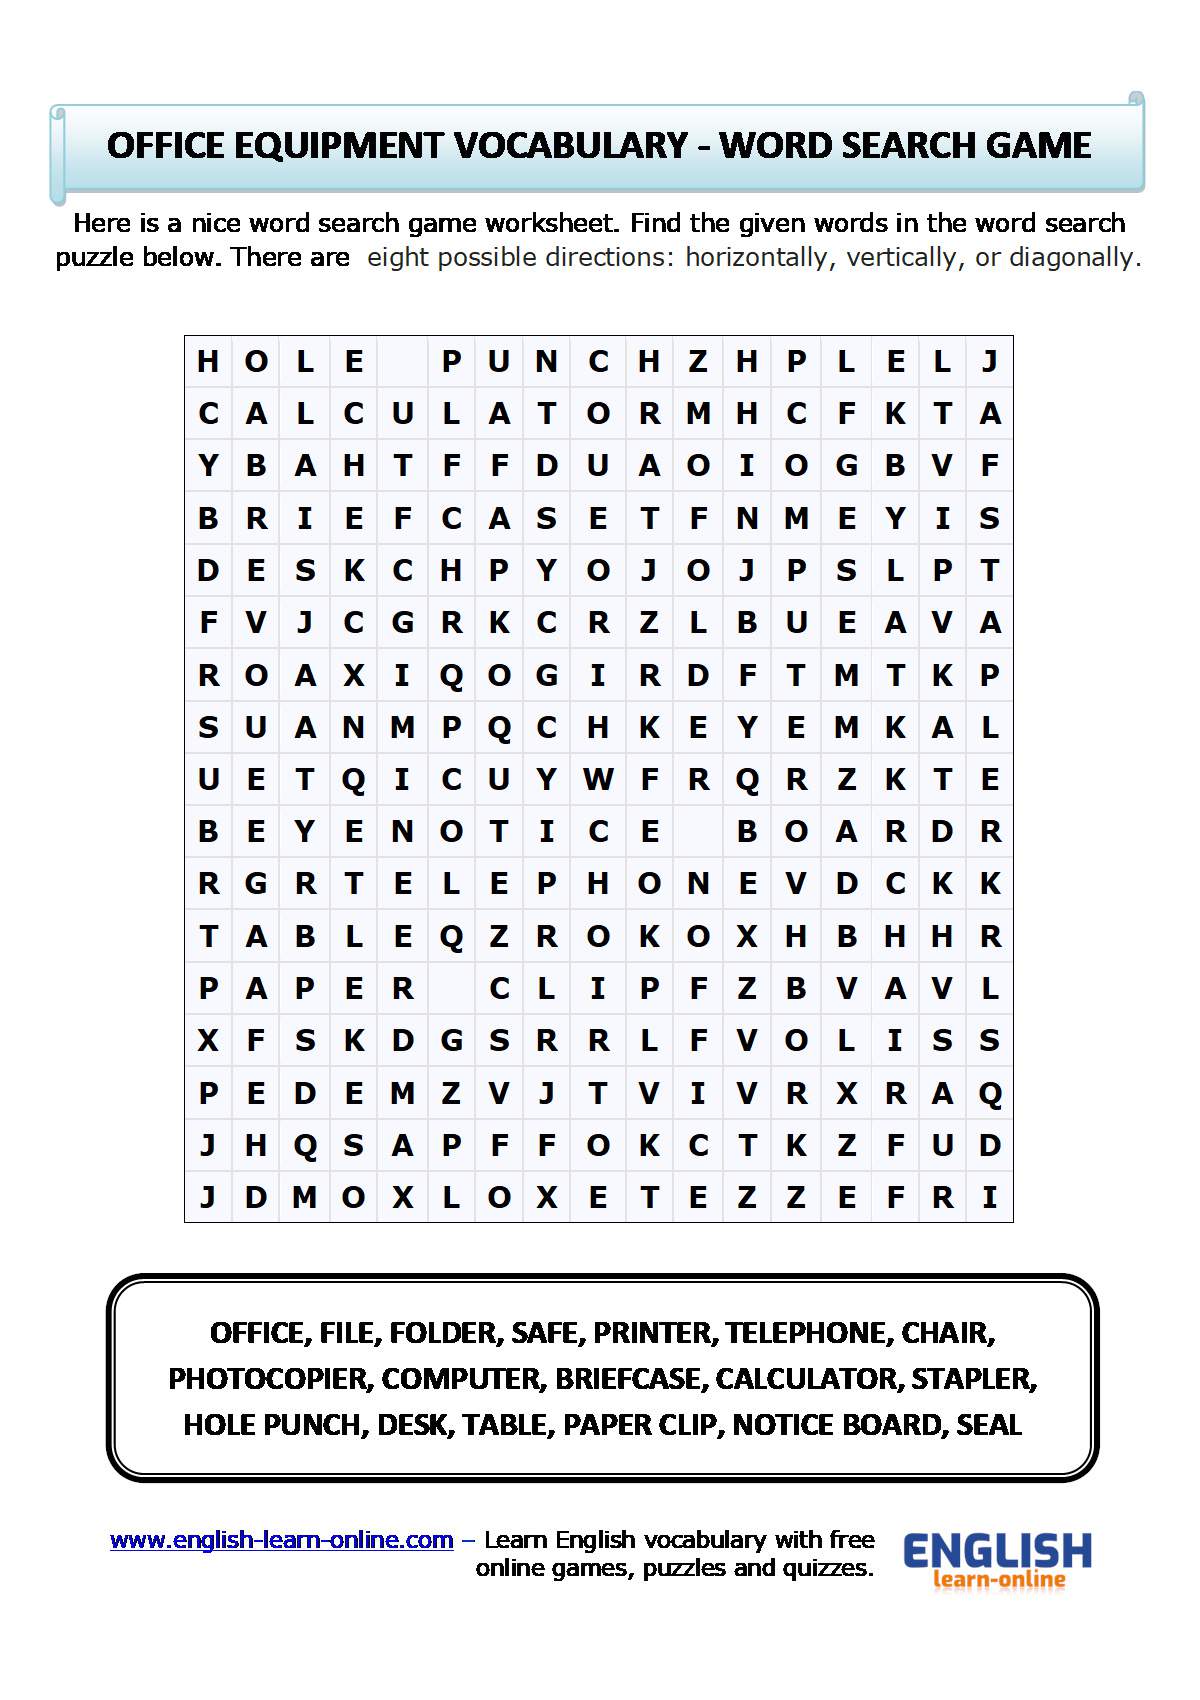 https://www.learnenglish.com/wp-content/uploads/custom-uploads/VOCABULARY/office/worksheets/office-equipment-vocabulary-word-search-puzzle-worksheet.jpg